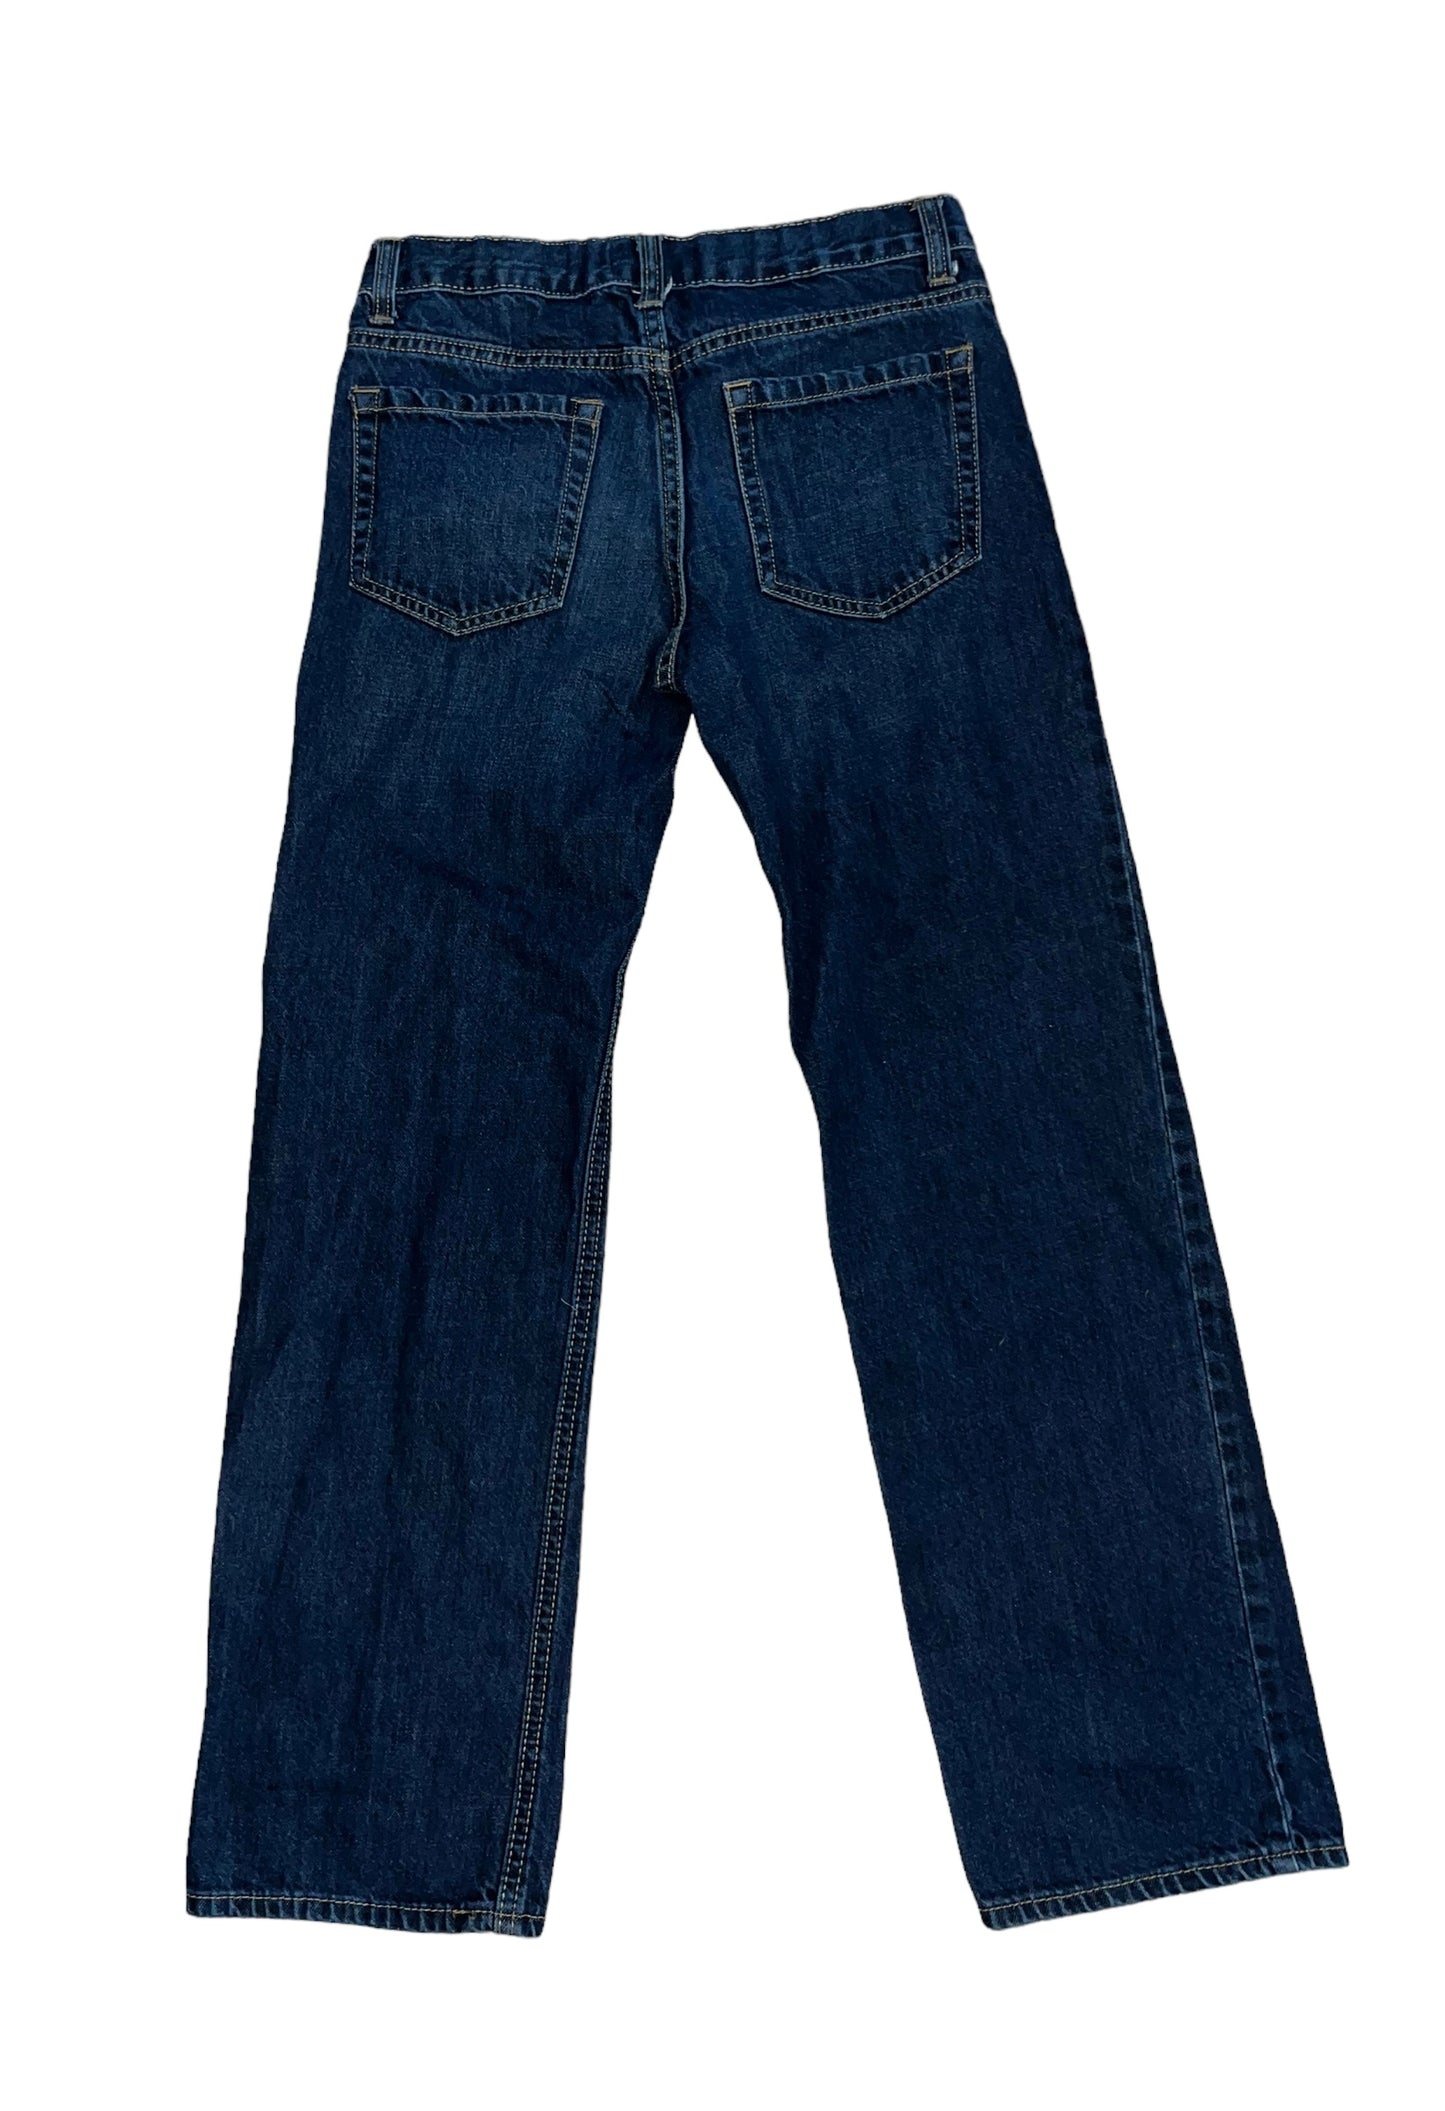 Old Navy 12 Bottoms